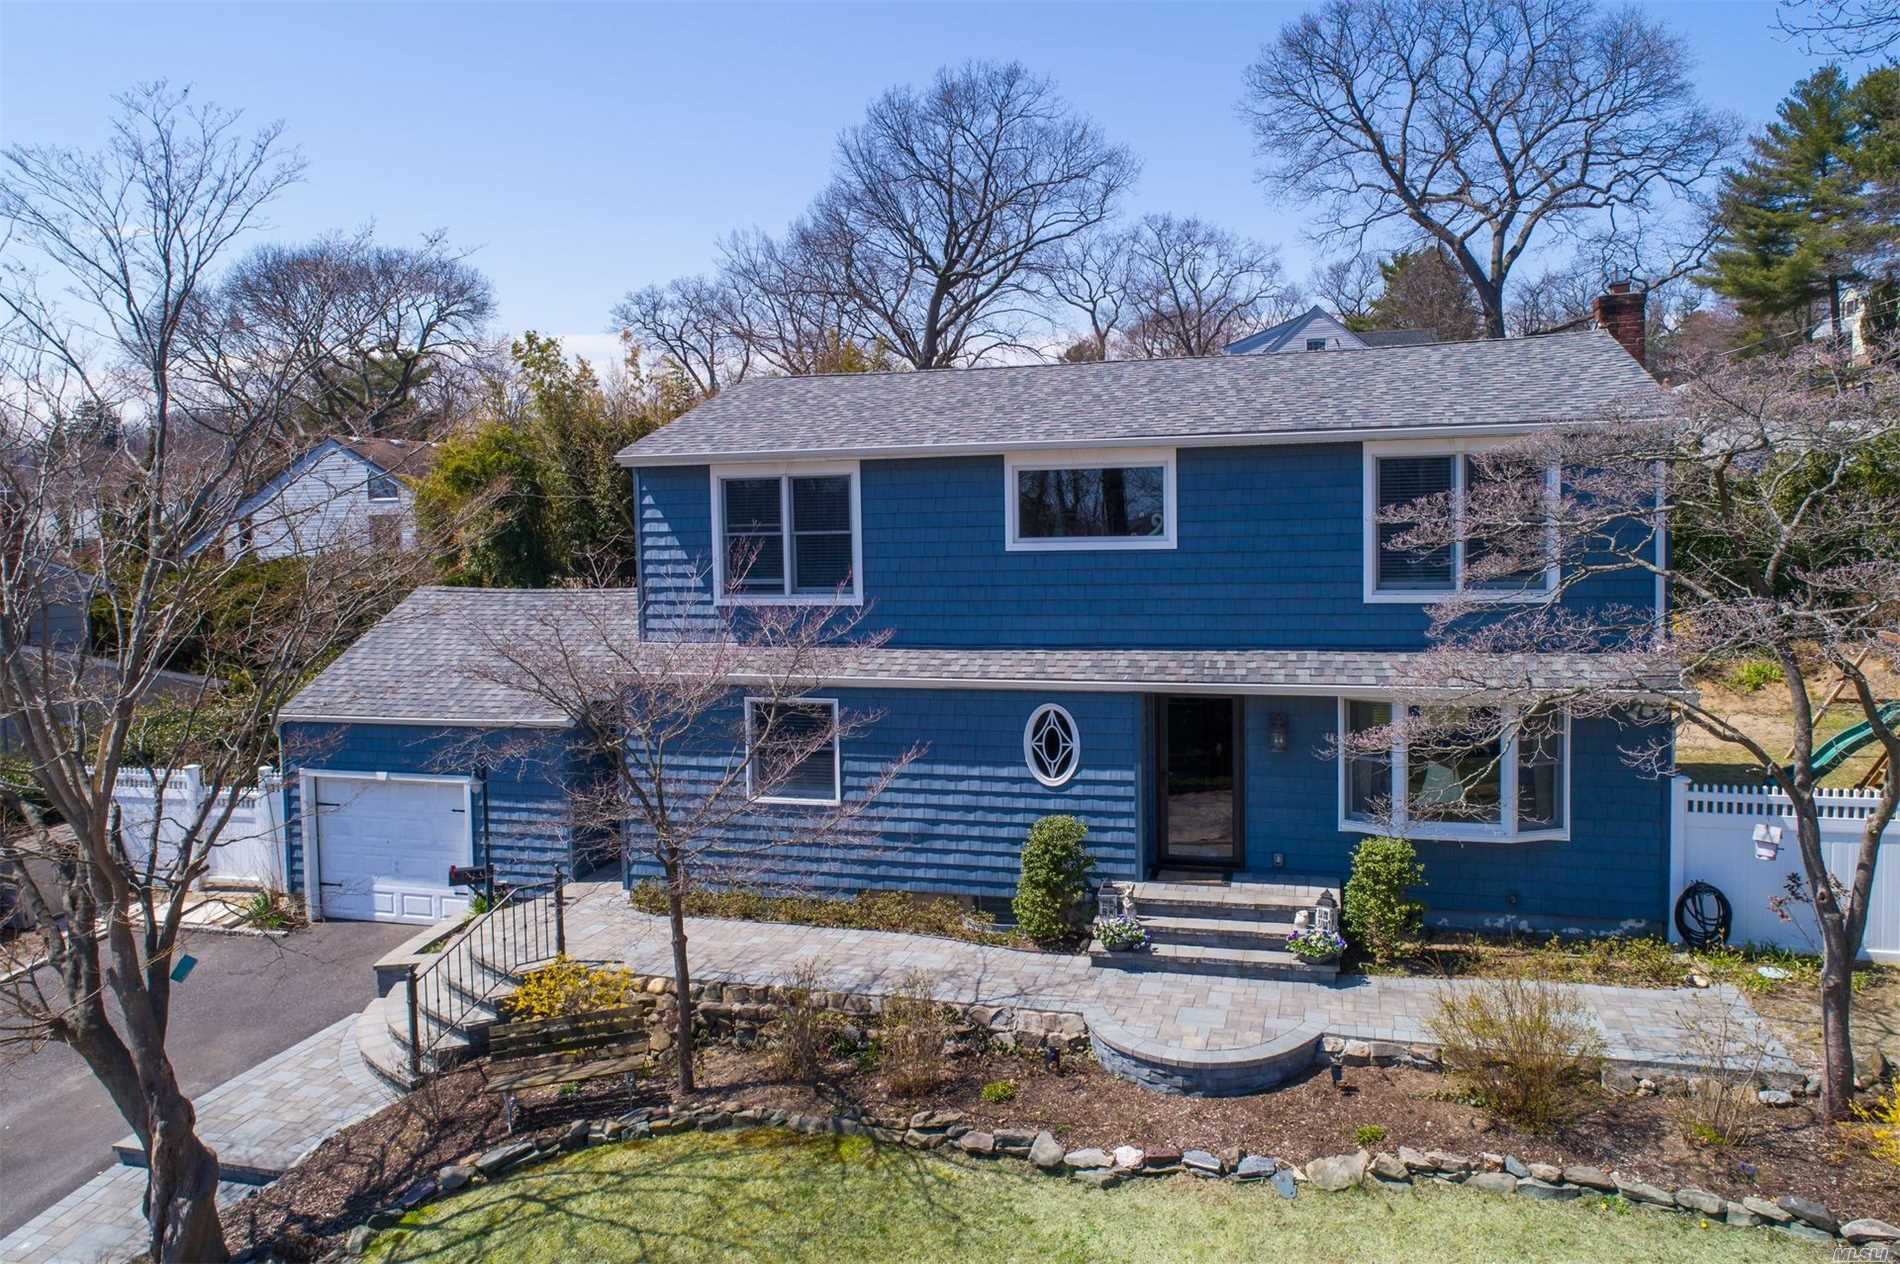 Tastefully Renovated 4 Years Ago, This 3 Bedroom Colonial Sits On An Oversized Corner Lot. A Large Country Kitchen With Custom Built-Ins Is The Heart Of This Home With French Doors Opening To The Outdoor Entertaining Area. Flood Insurance Not Required.